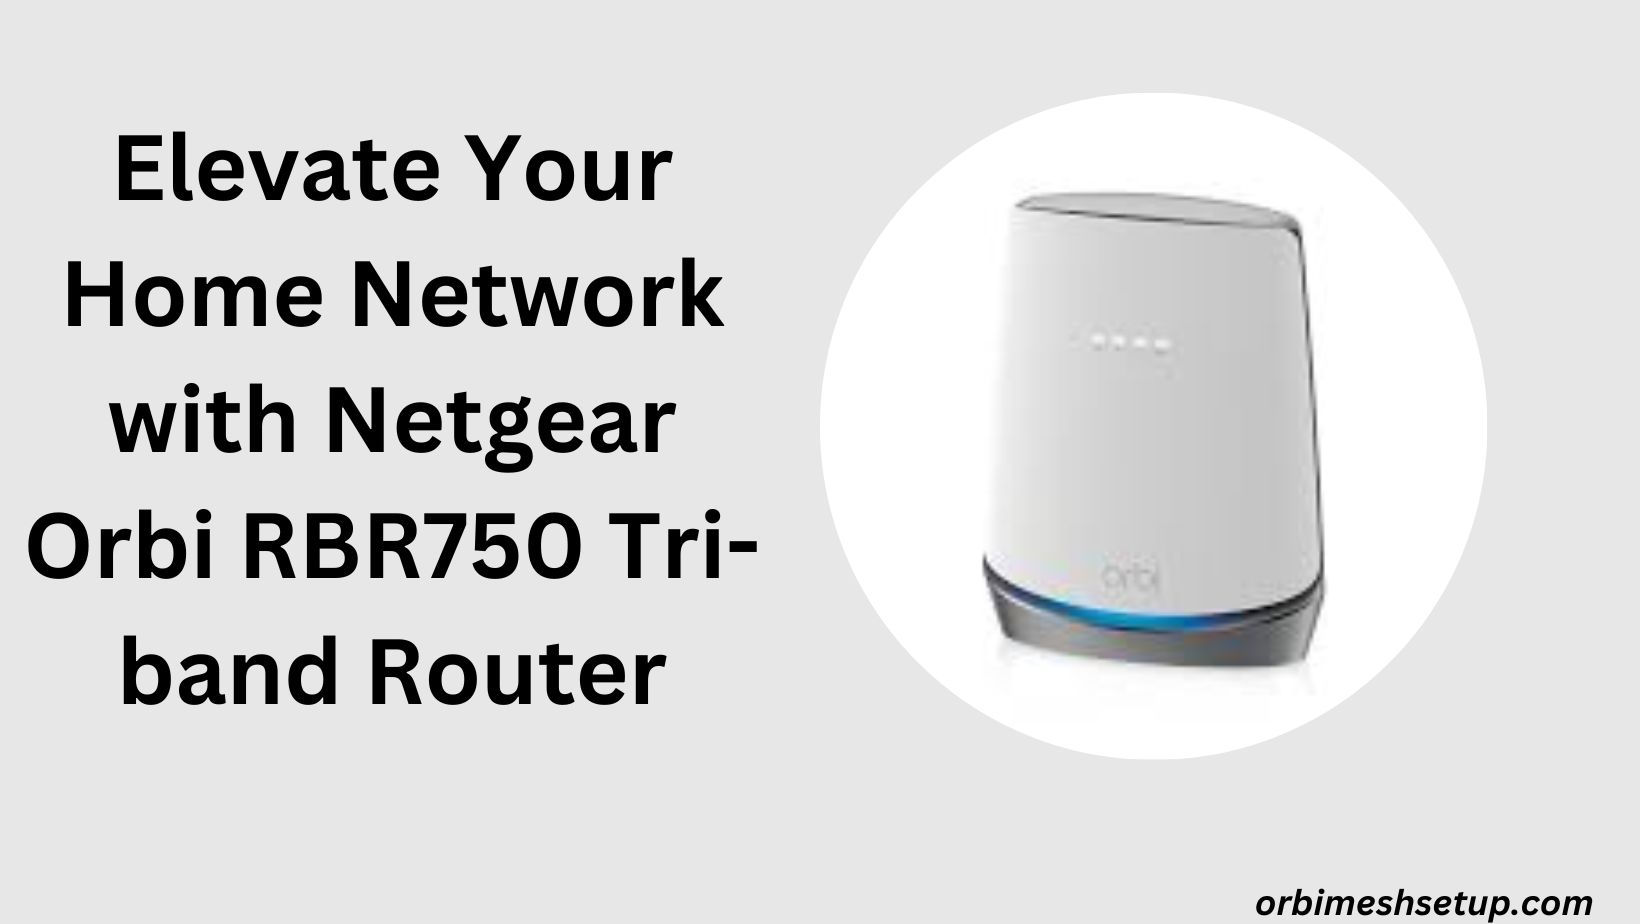 Read more about the article Elevate Your Home Network with Netgear Orbi RBR750 Tri-band Router